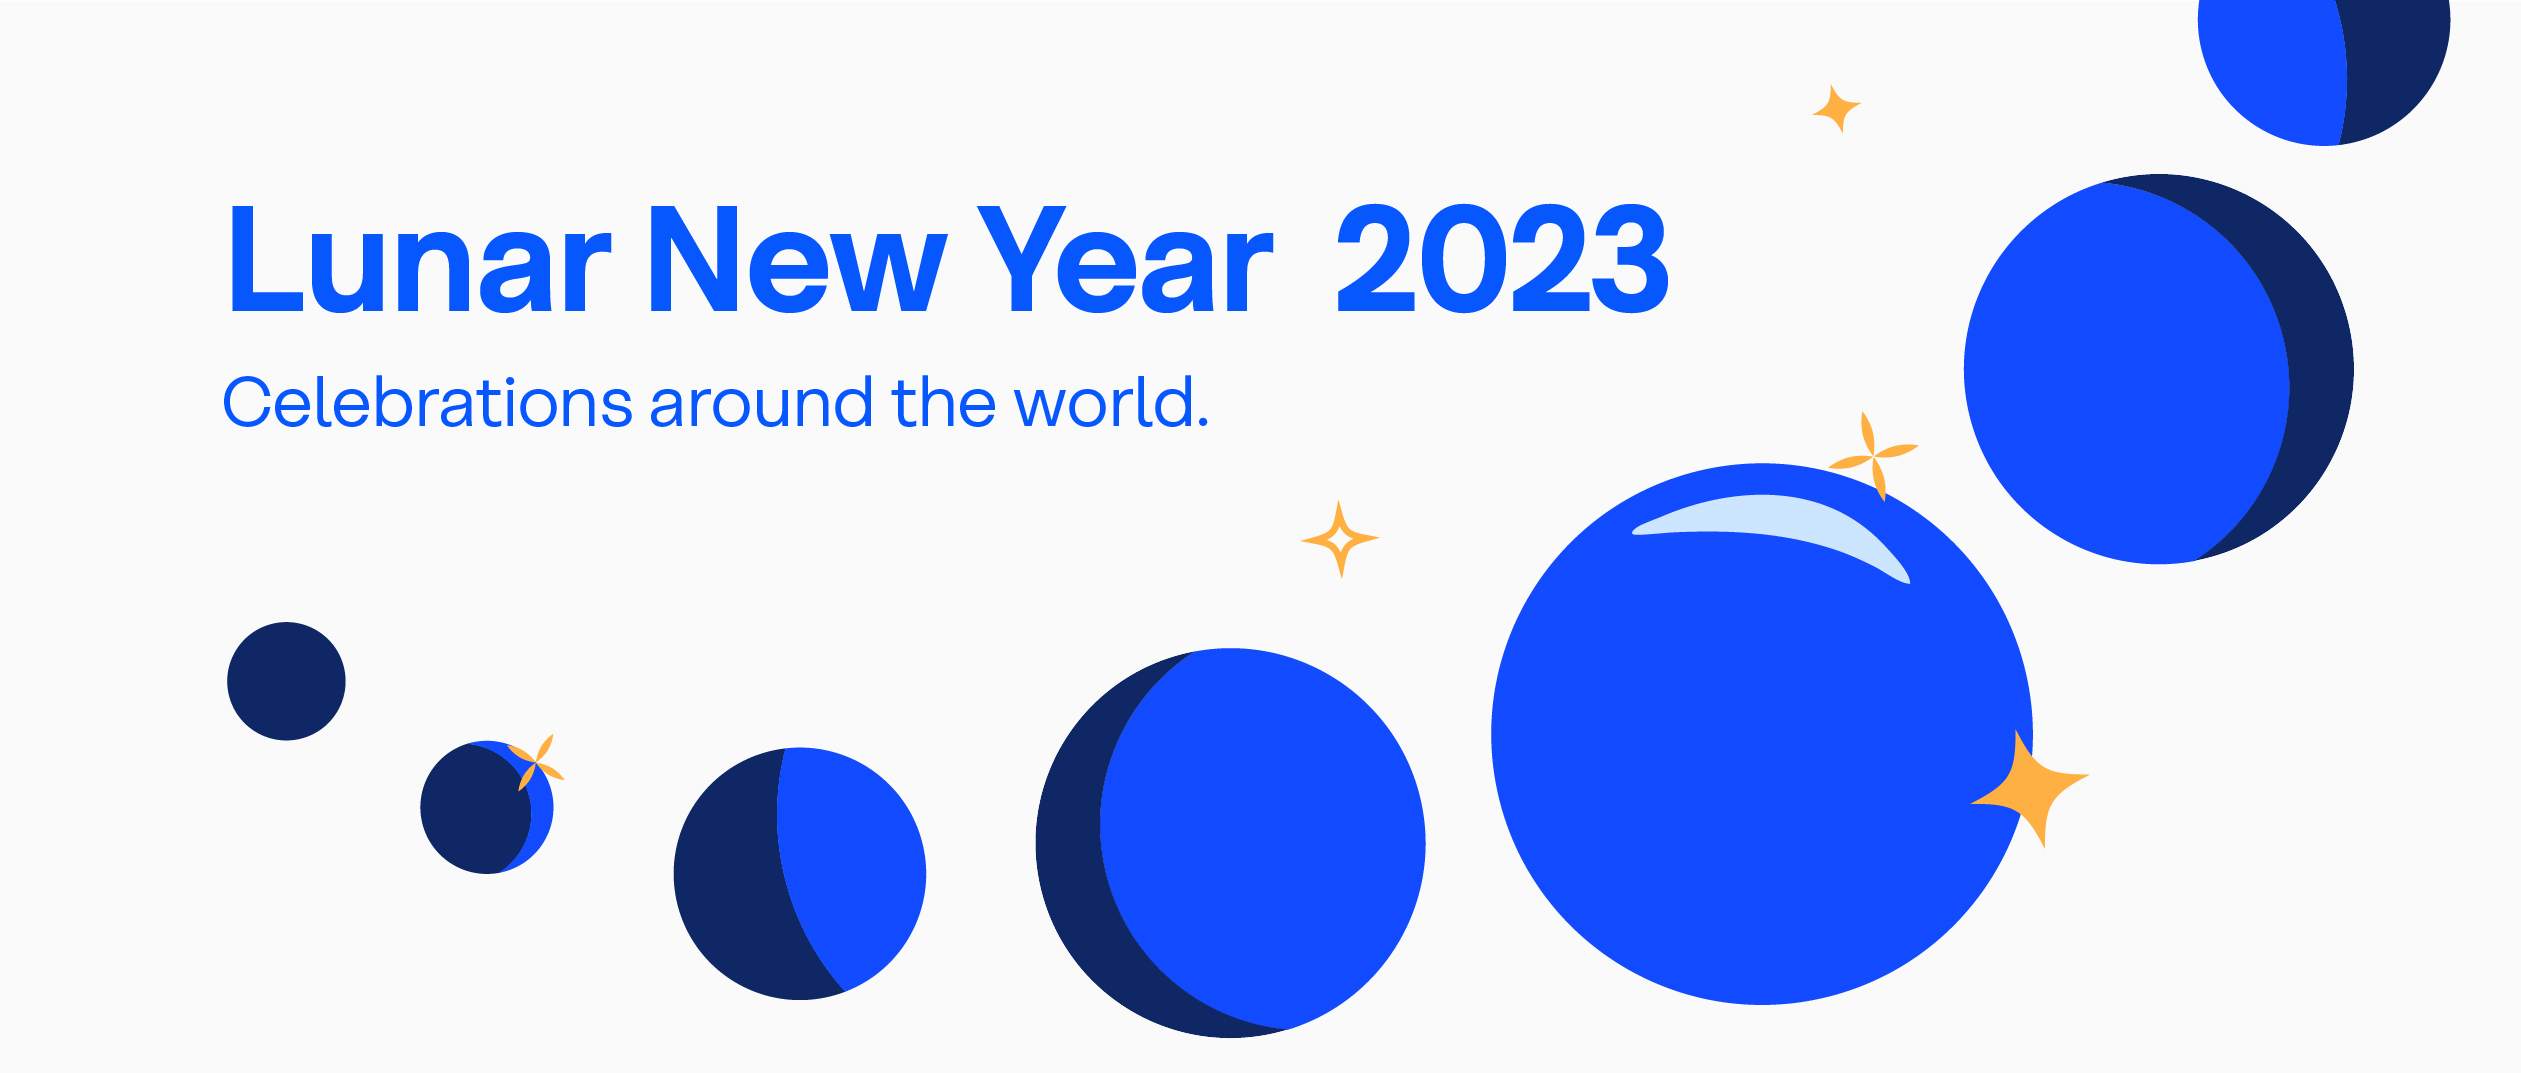 On a light blue background, large dark blue text reads: “Lunar New Year 2023” and smaller text underneath reads: “Celebrations around the world”. From the left to the top right of the slide, there is a simple illustration of the moon phases laid out in a semicircle arrangement, where the ones in front are larger to indicate perspective. The largest one is a full round moon, representing the new moon. There are a few yellow star illustrations on top